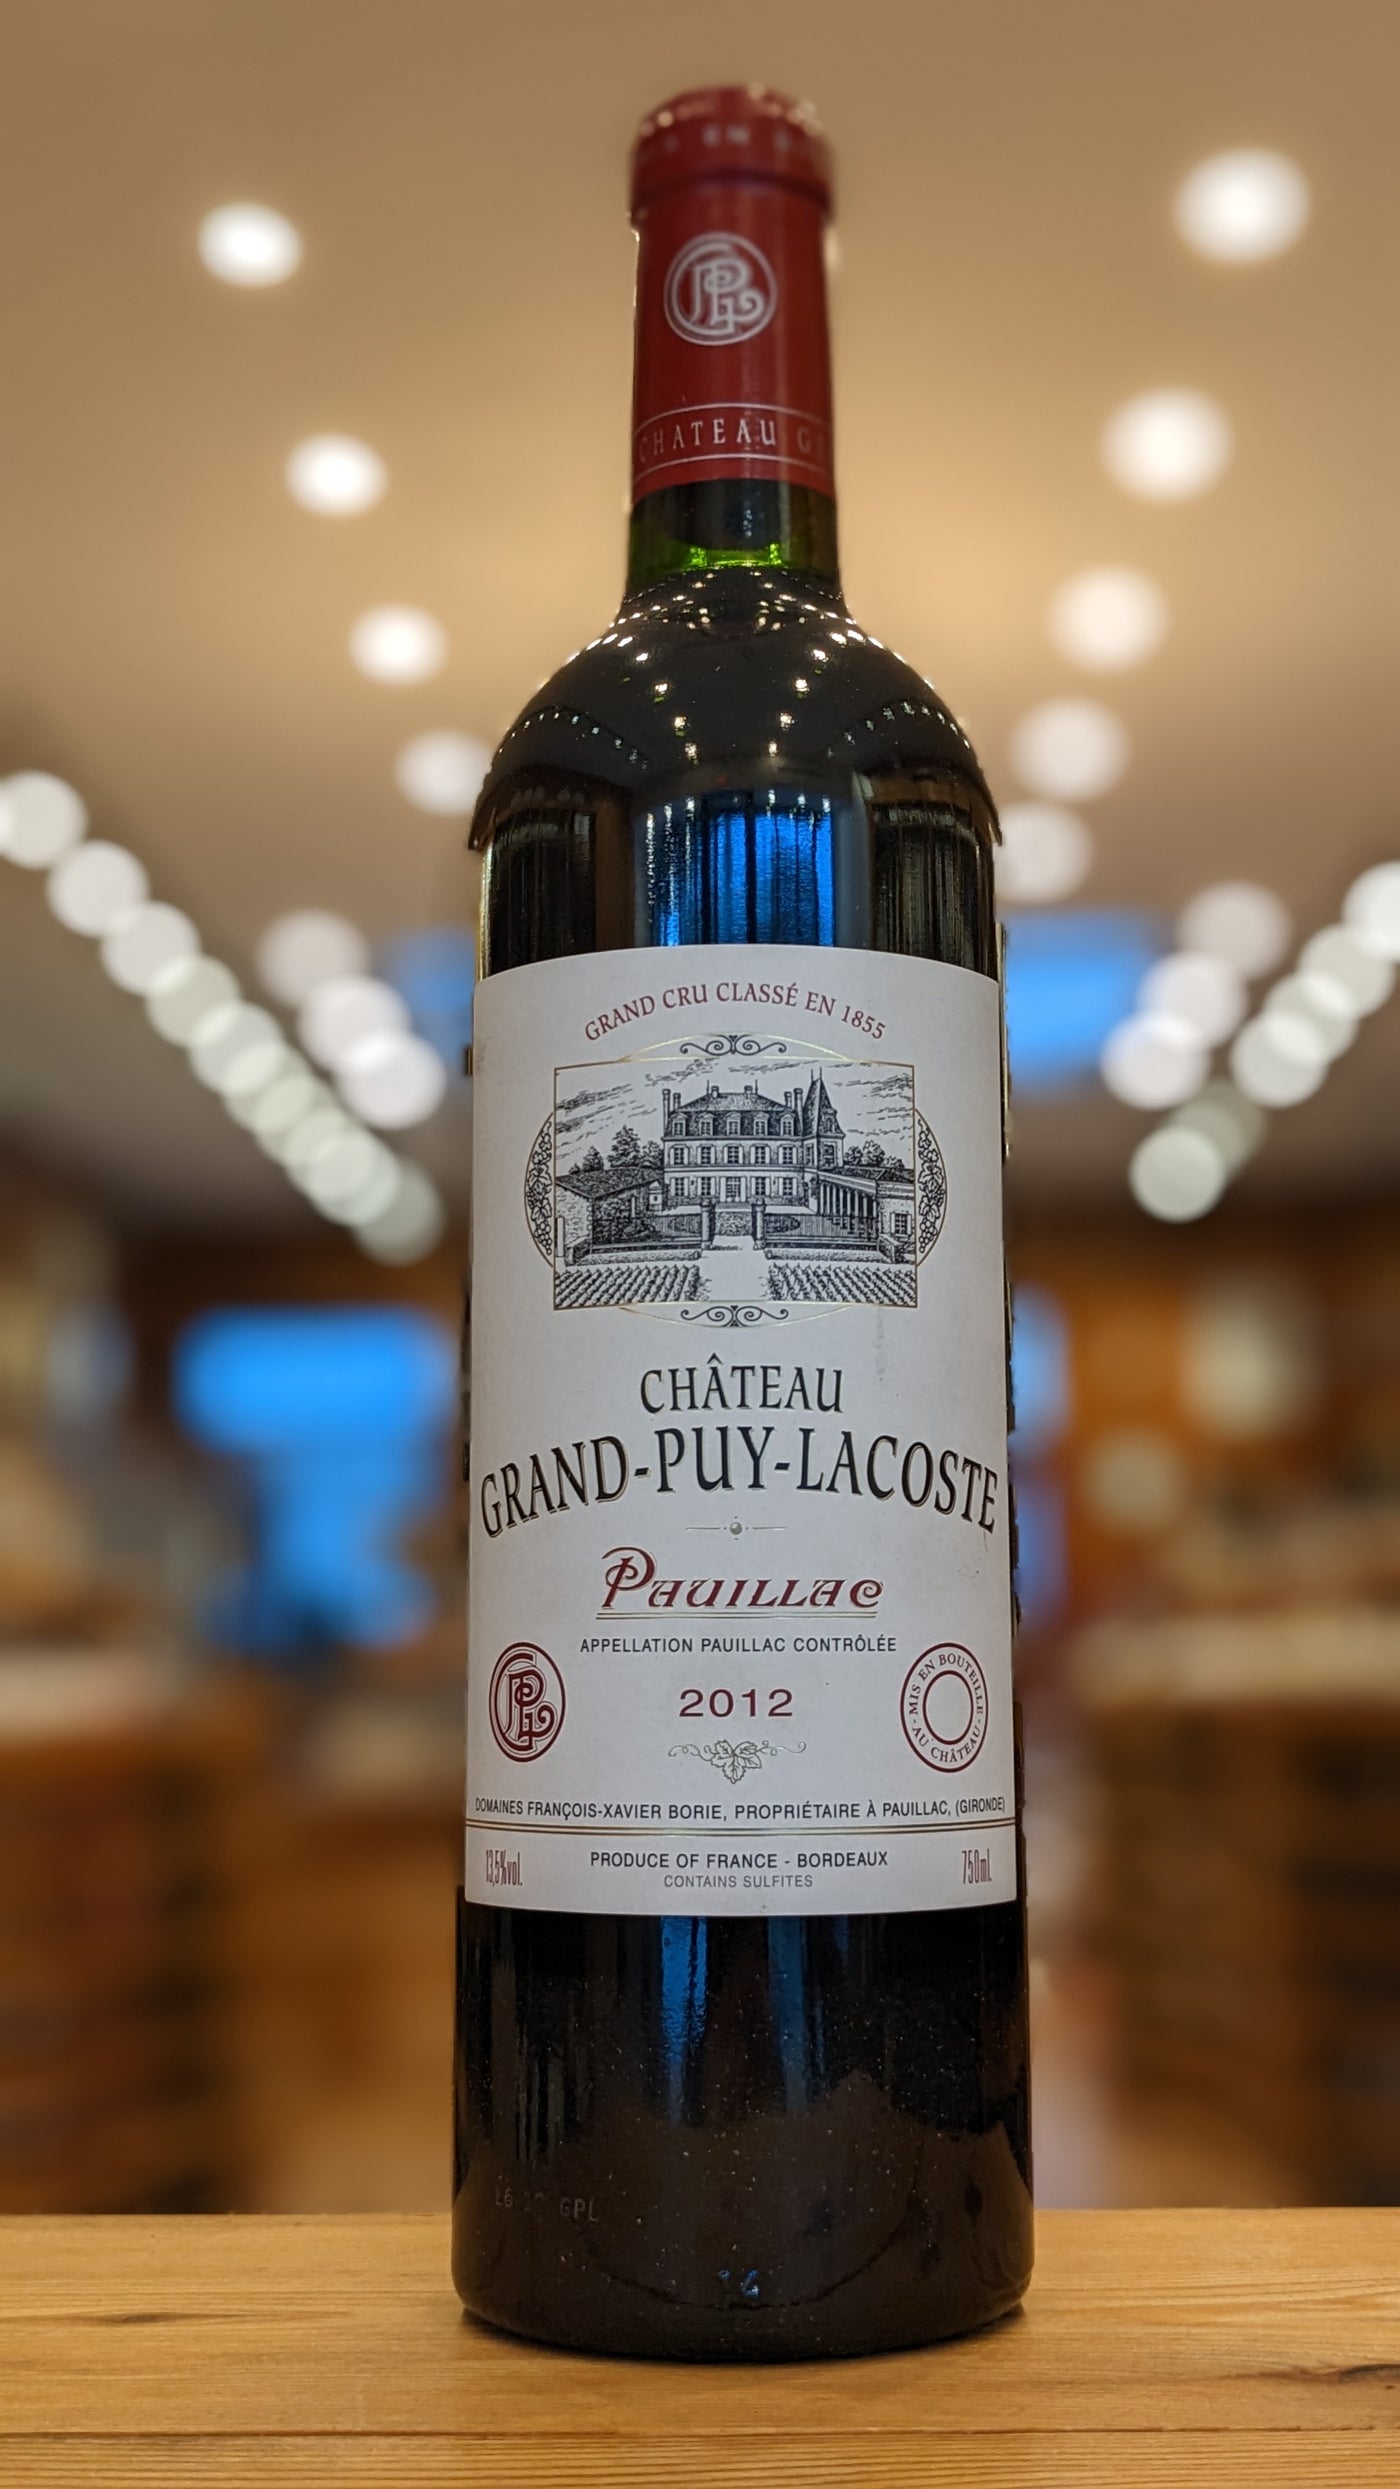 Chateau Grand-Puy-Lacoste Pauillac 2012